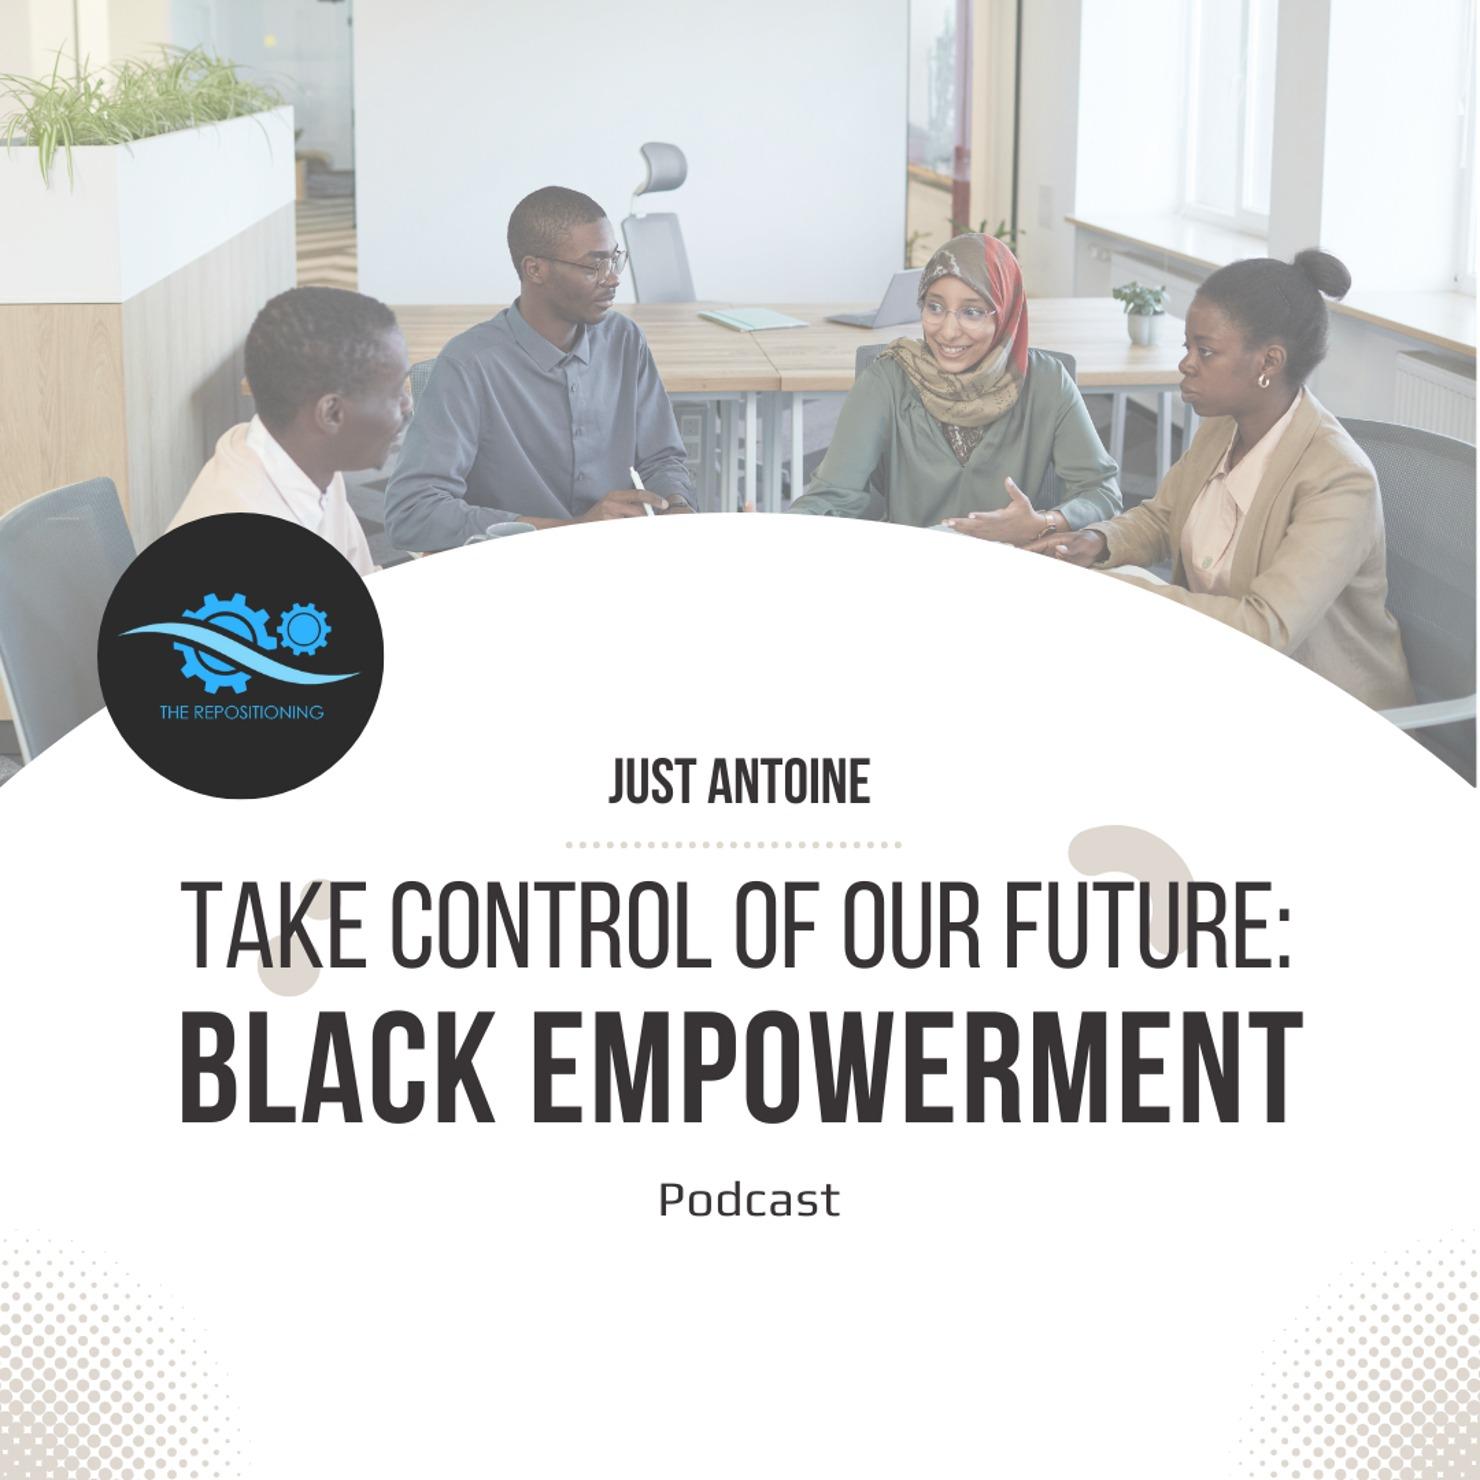 Take Control of Our Future: Black Empowerment